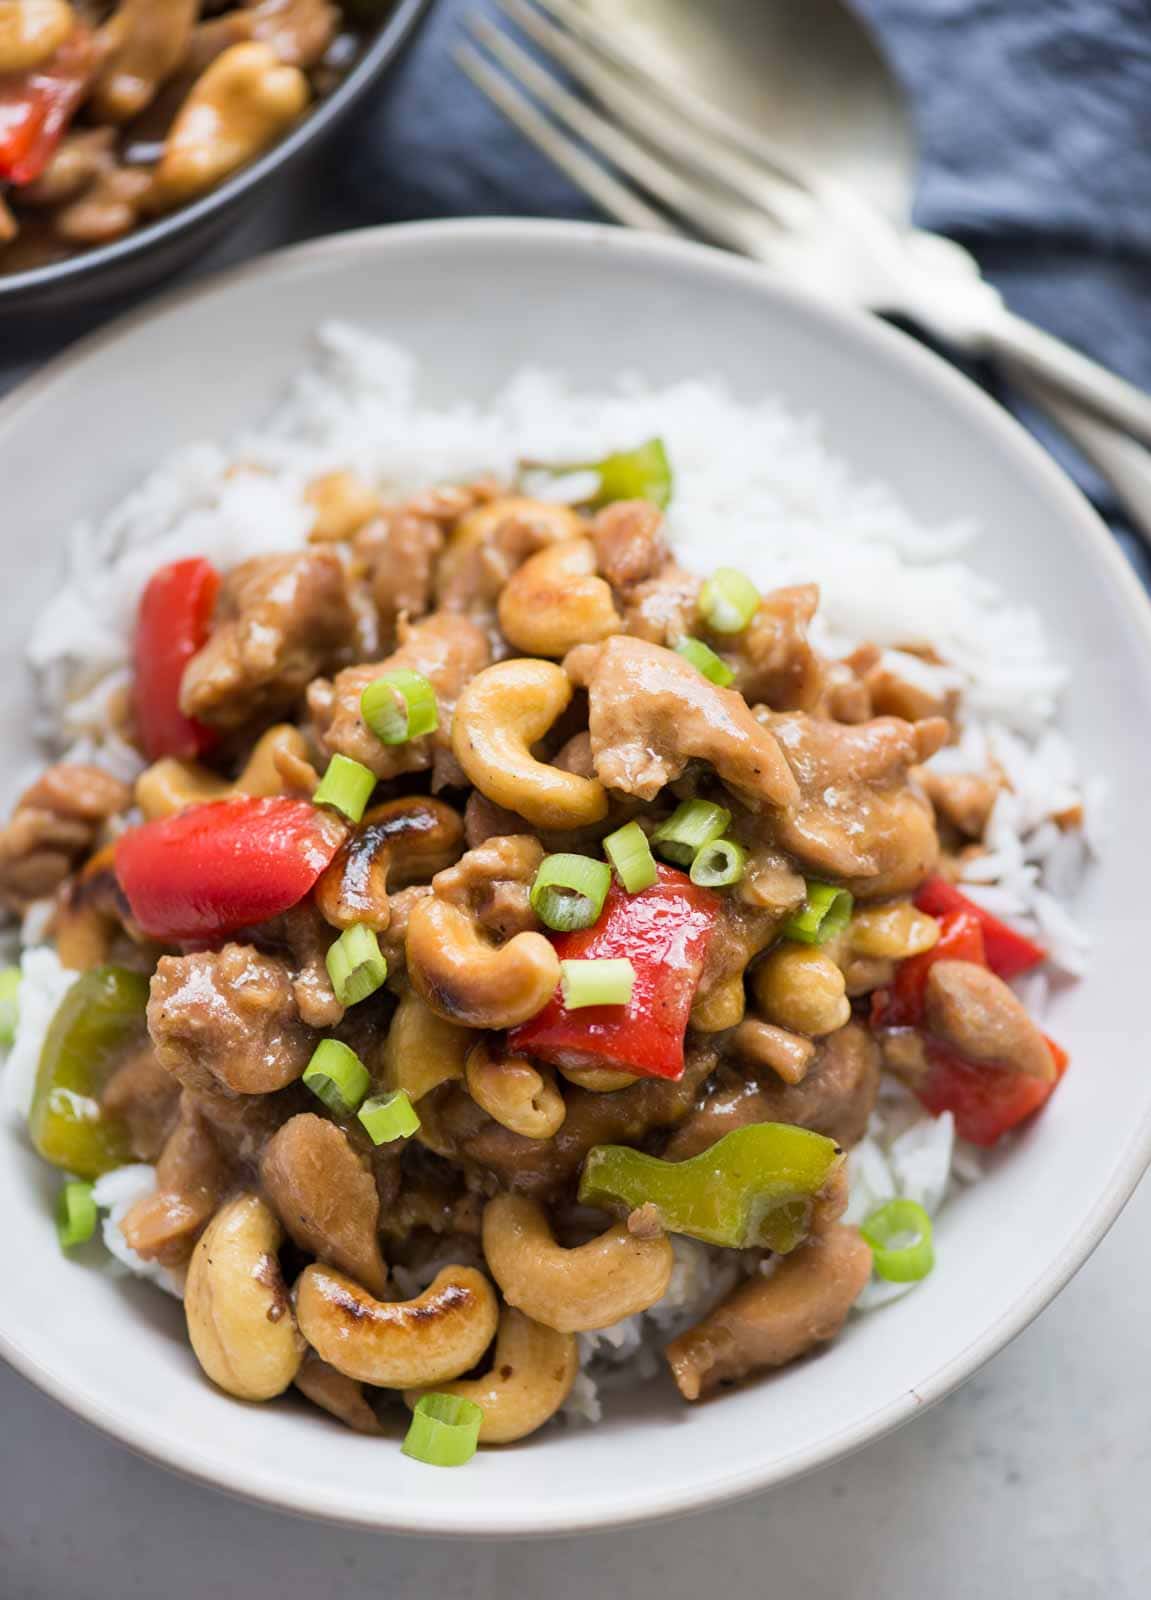 Take away Style Cashew Chicken with crunchy peppers made right in the Instant Pot. This extra saucy Cashew Chicken is pairs really well with rice. You can easily make it on the stovetop as well.  